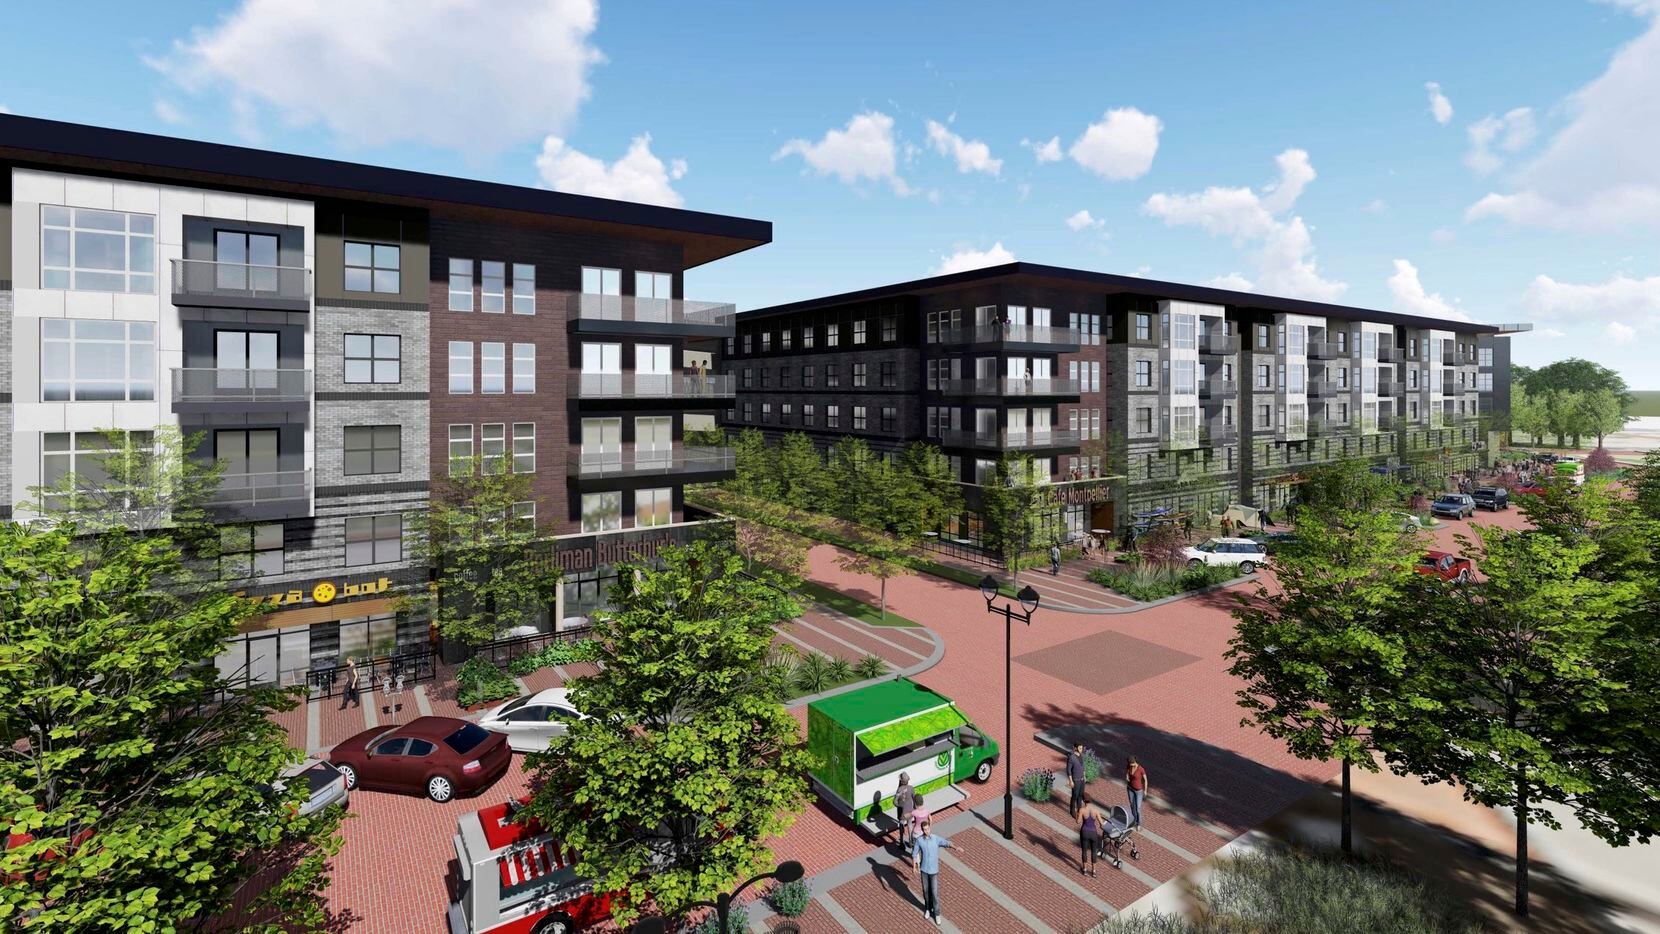 Construction has started on a 436-unit apartment community in the Trinity Mills Station...